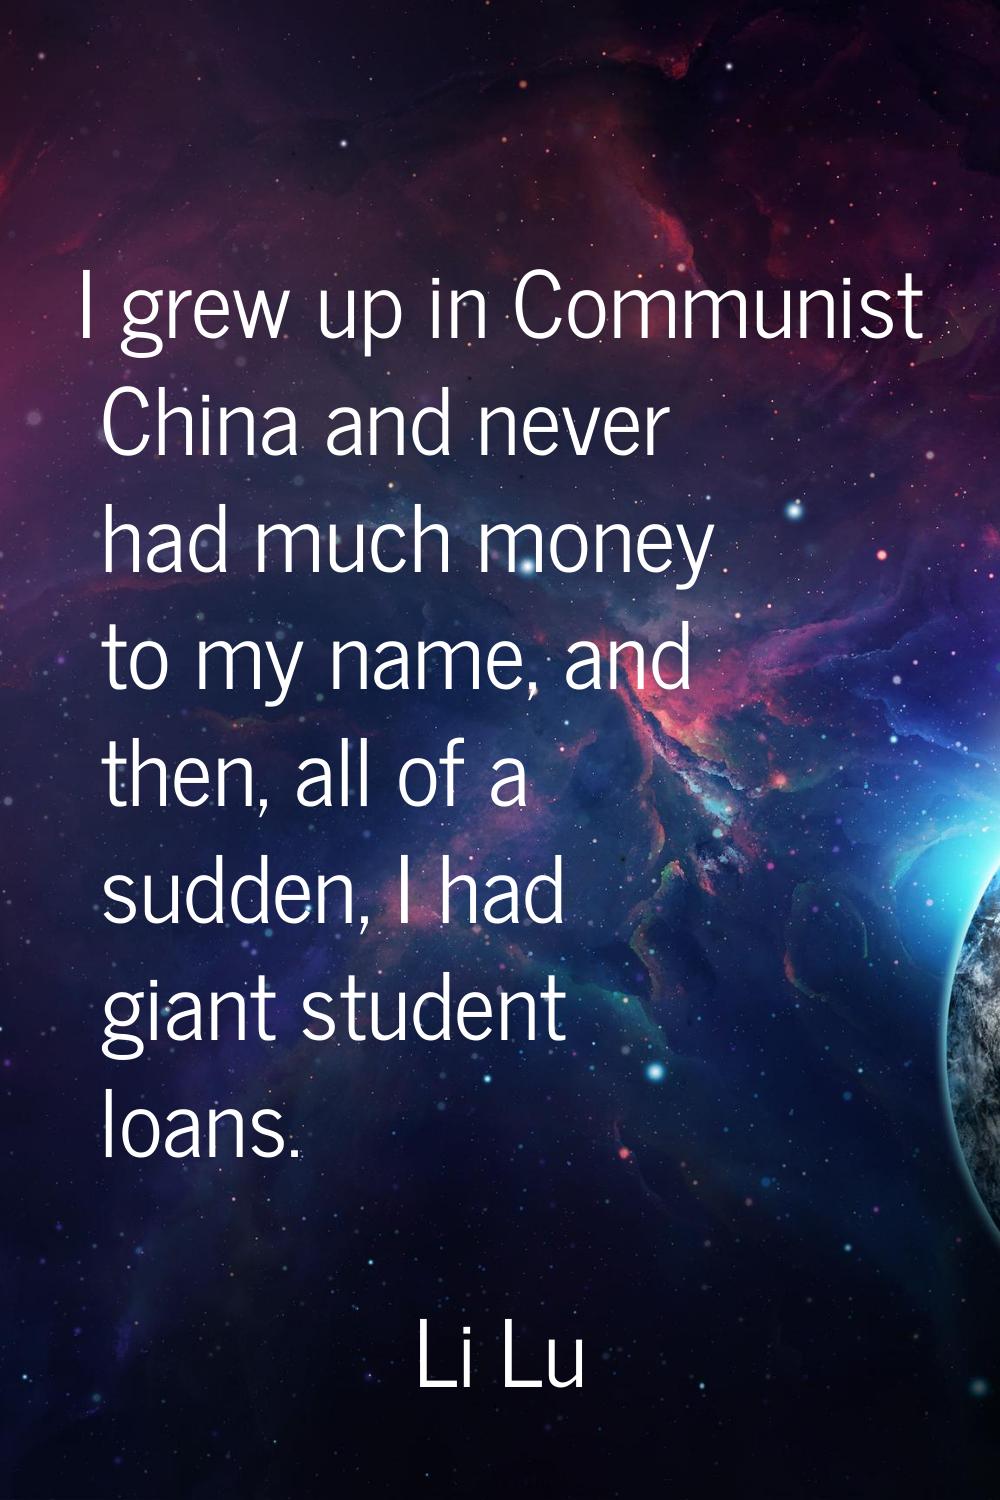 I grew up in Communist China and never had much money to my name, and then, all of a sudden, I had 